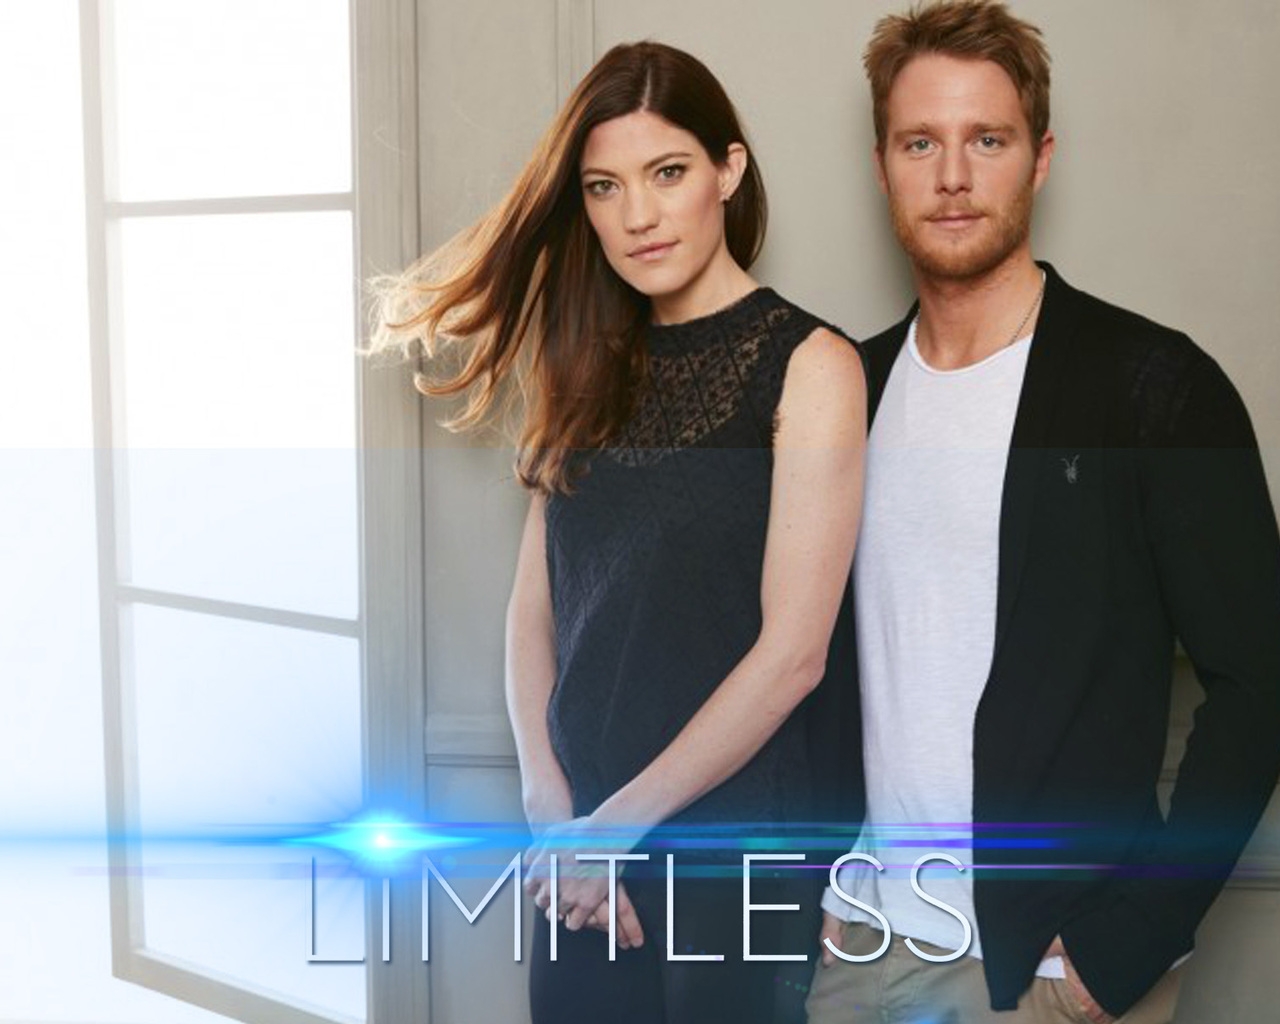 Limitless Cast for 1280 x 1024 resolution